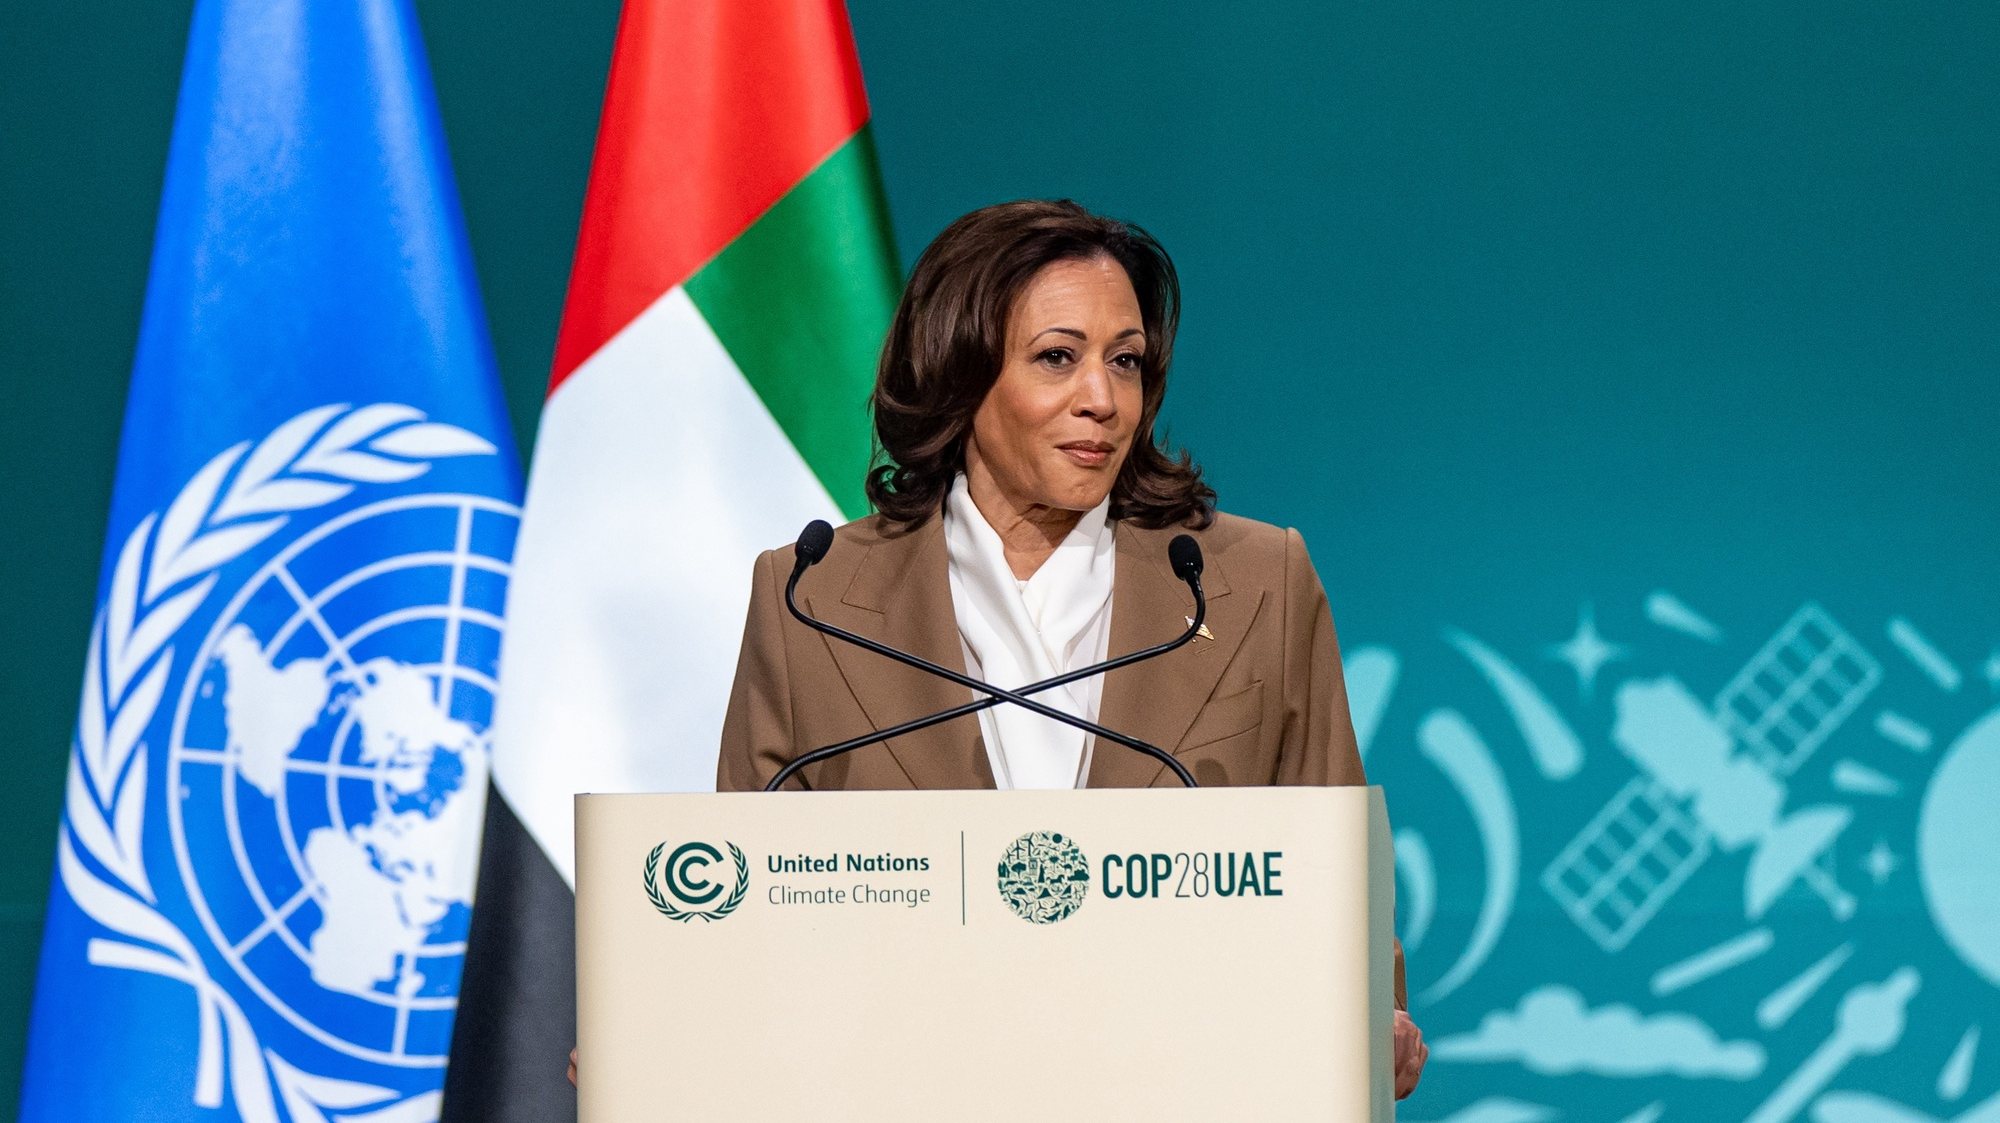 epa11006947 Kamala Harris, Vice President of the United States of America, speaks during the UN Climate Change Conference COP28, in Dubai, United Arab Emirates, 02 December 2023. The 2023 United Nations Climate Change Conference (COP28), runs from 30 November to 12 December, and is expected to host one of the largest number of participants in the annual global climate conference as over 70,000 estimated attendees, including the member states of the UN Framework Convention on Climate Change (UNFCCC), business leaders, young people, climate scientists, Indigenous Peoples and other relevant stakeholders will attend.  EPA/MARTIN DIVISEK